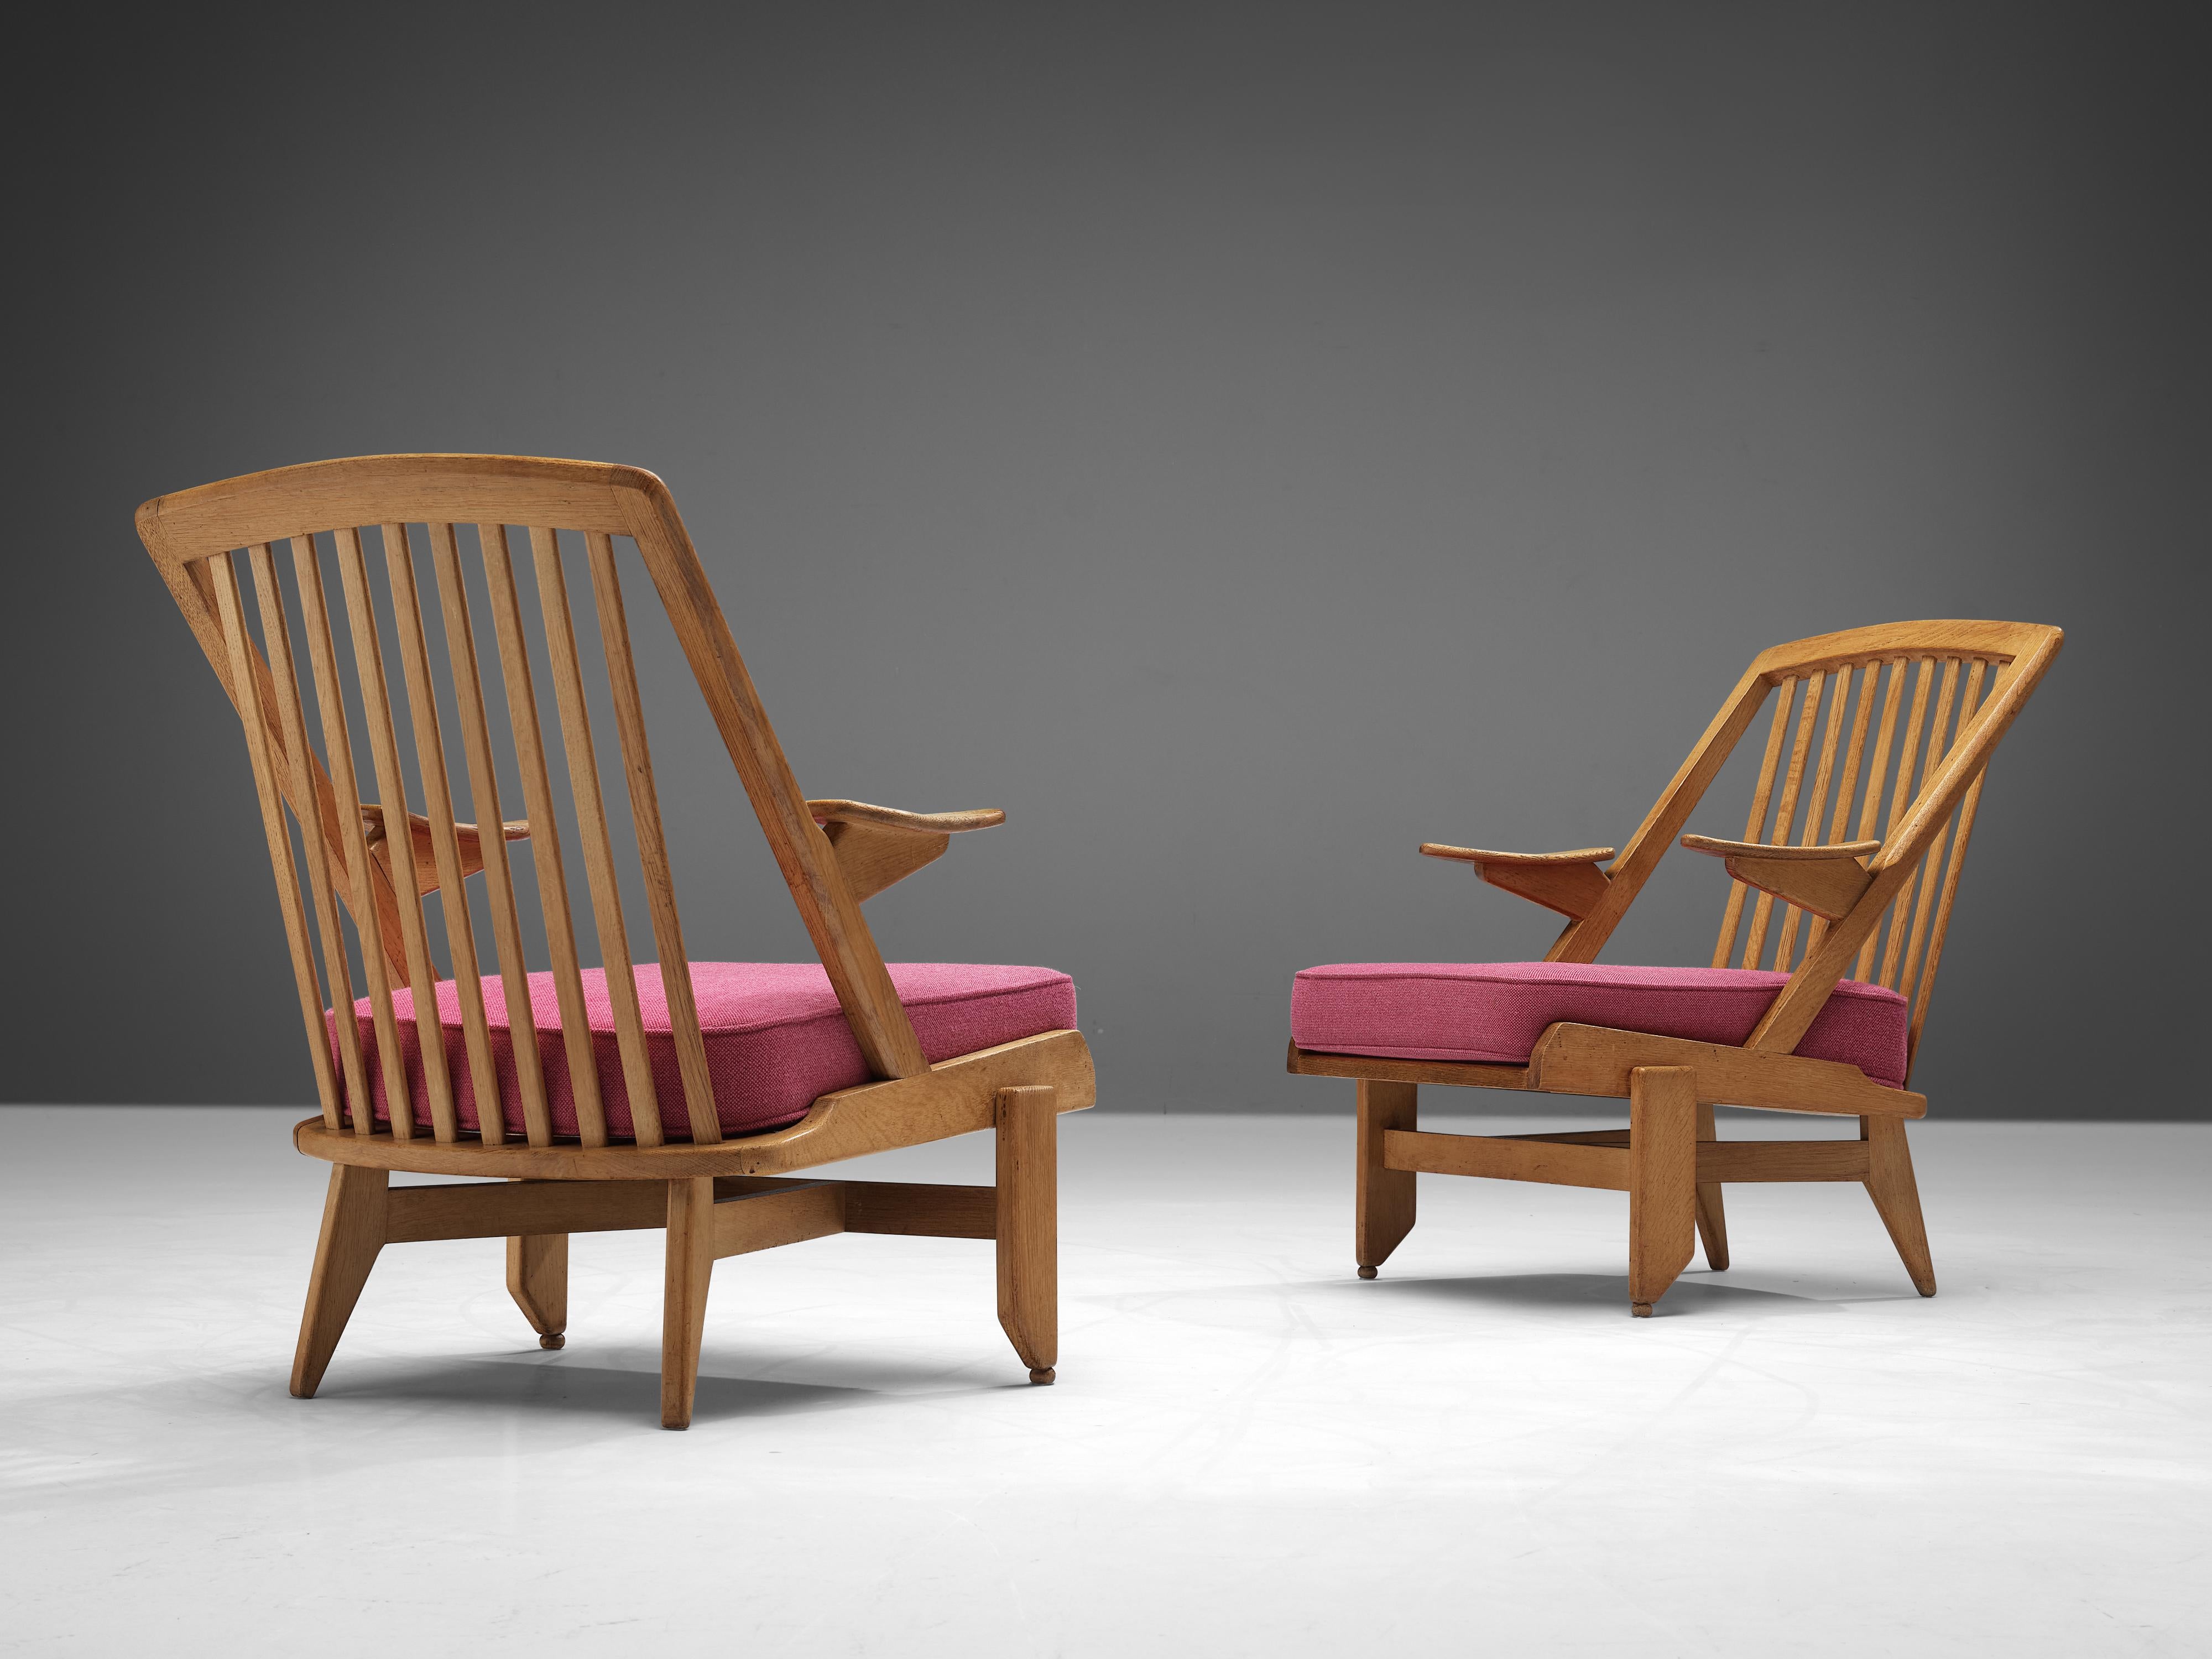 Guillerme et Chambron, pair of lounge chairs, pink fabric, oak, France, 1960s

This French designer duo is known for their extremely high-quality solid oak furniture, from which this set is another great example. These chairs have a very interesting